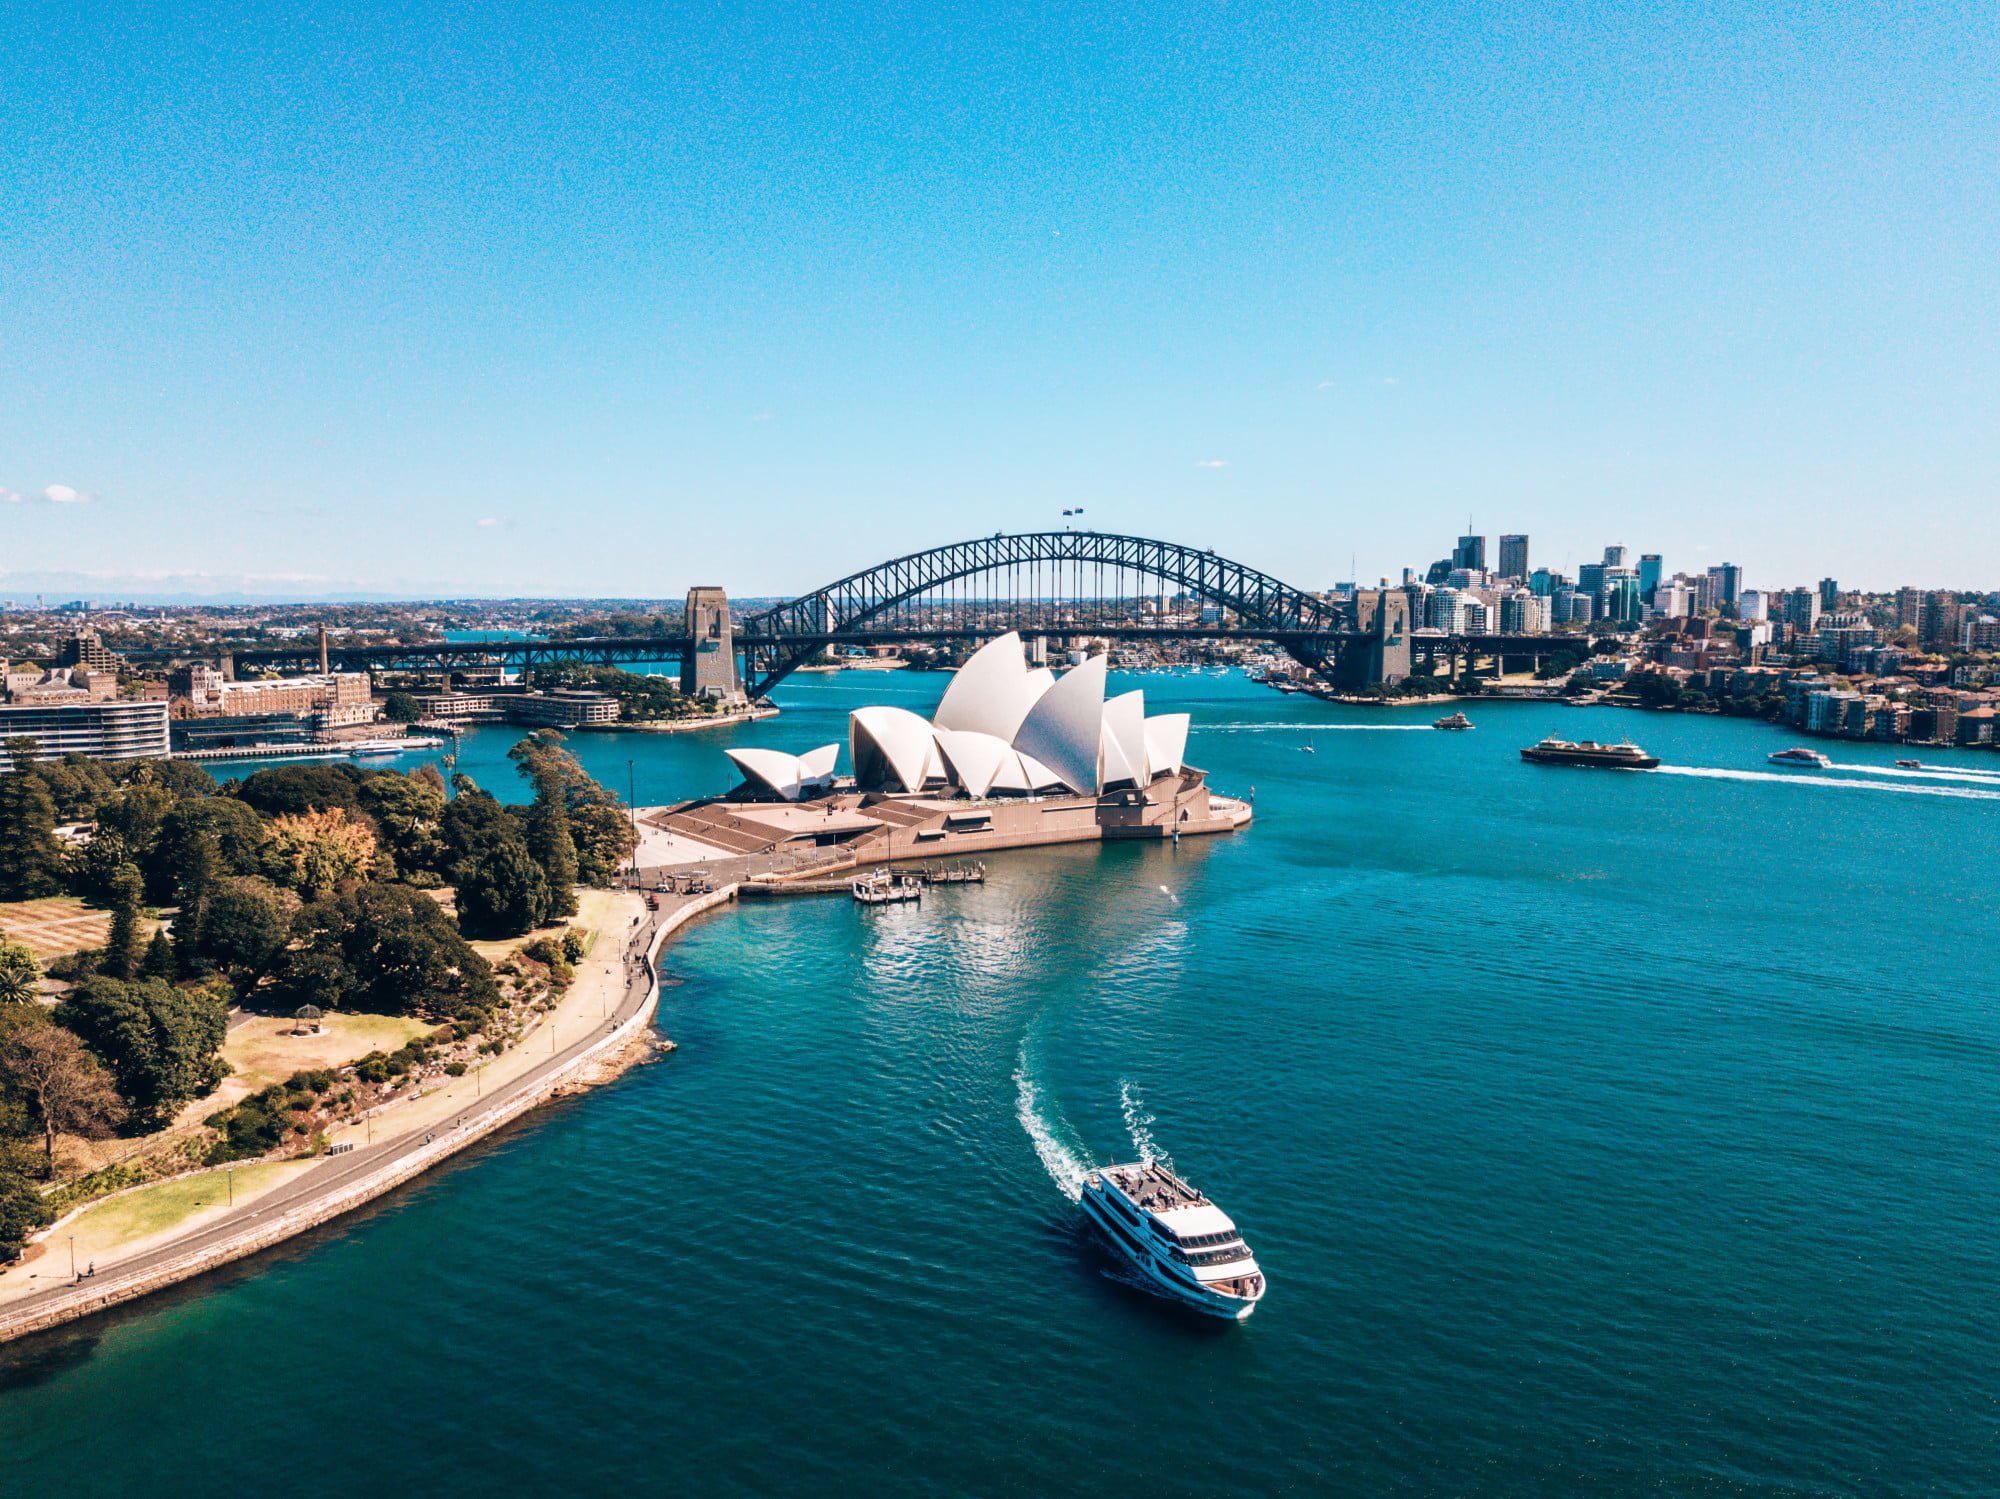 When it comes to living in Australia, there are a couple things you should understand. Luckily, this guide has you covered.